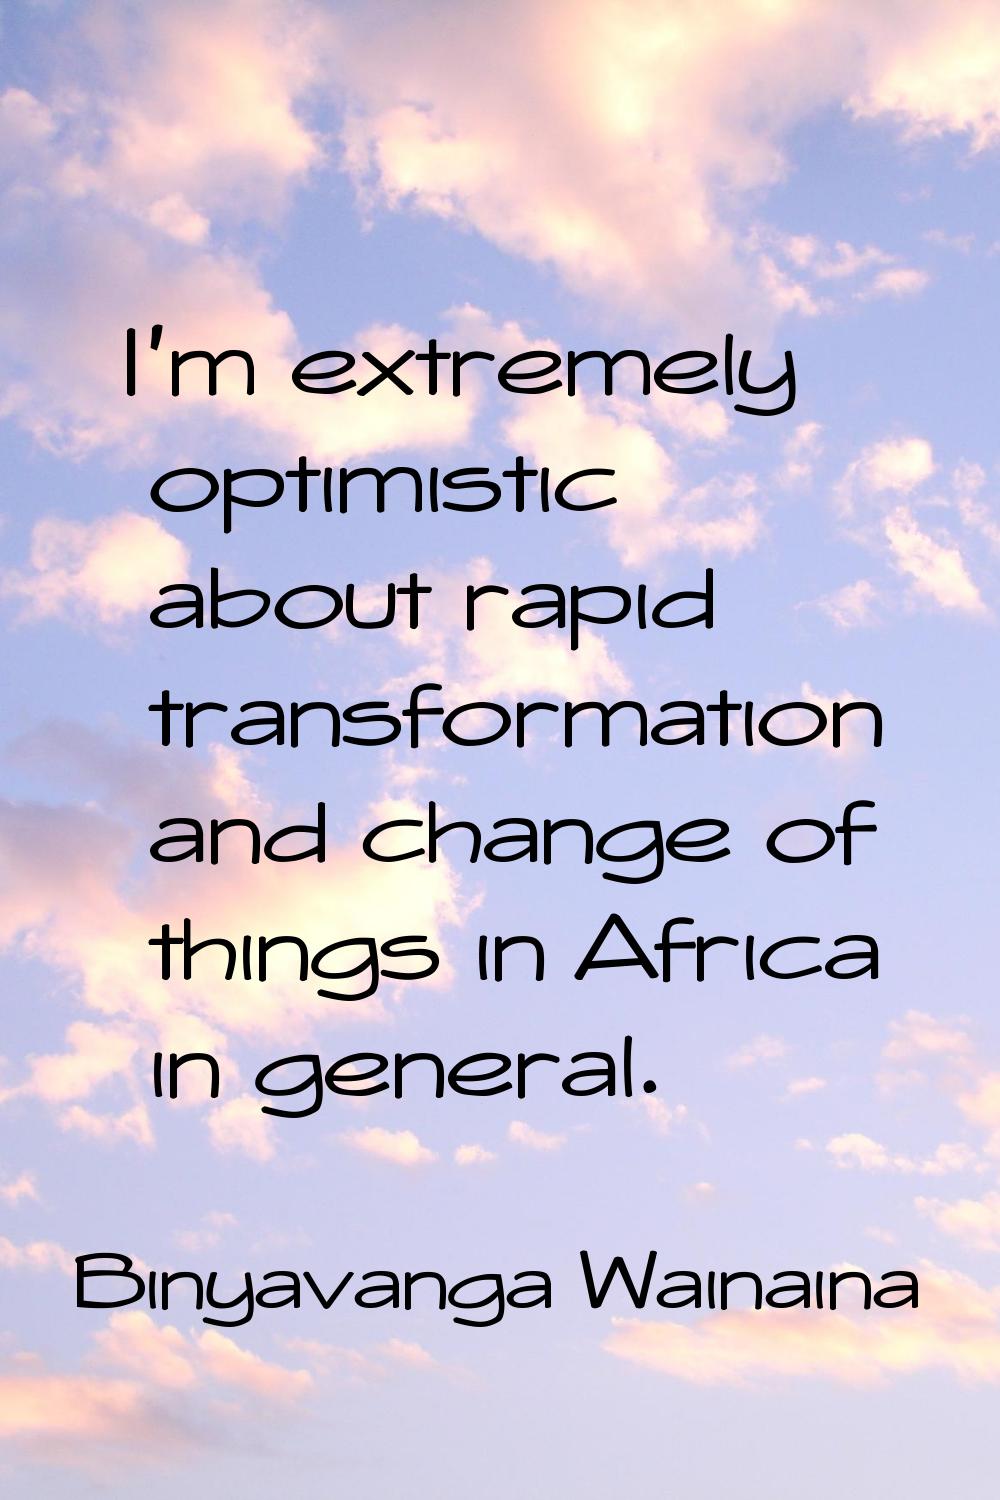 I'm extremely optimistic about rapid transformation and change of things in Africa in general.